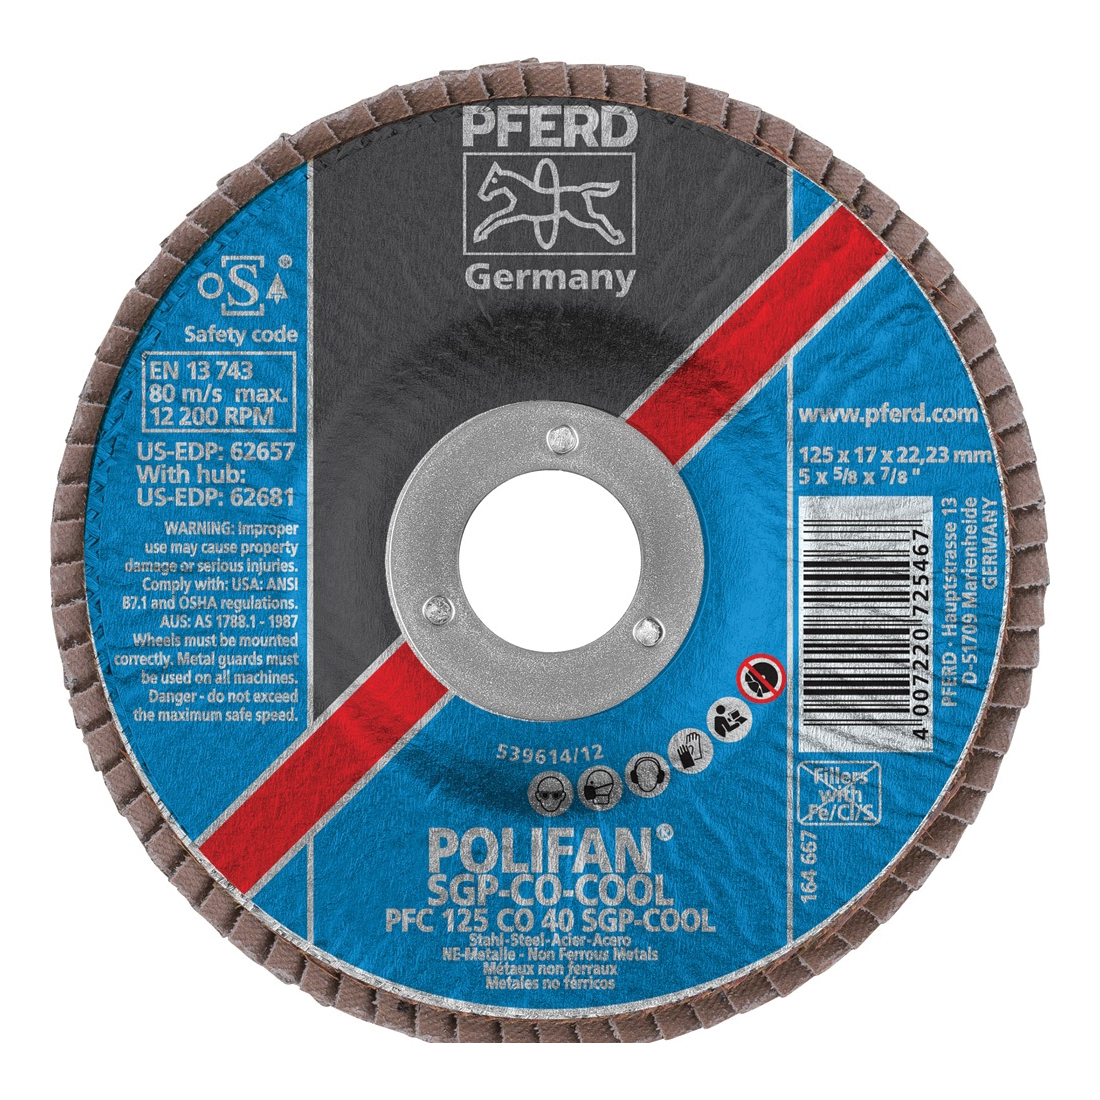 PFERD Polifan® 62657 Special Line SGP CO-COOL Unthreaded Coated Abrasive Flap Disc, 5 in Dia, 7/8 in Center Hole, 40 Grit, Ceramic Oxide Abrasive, Type 29 Conical Disc